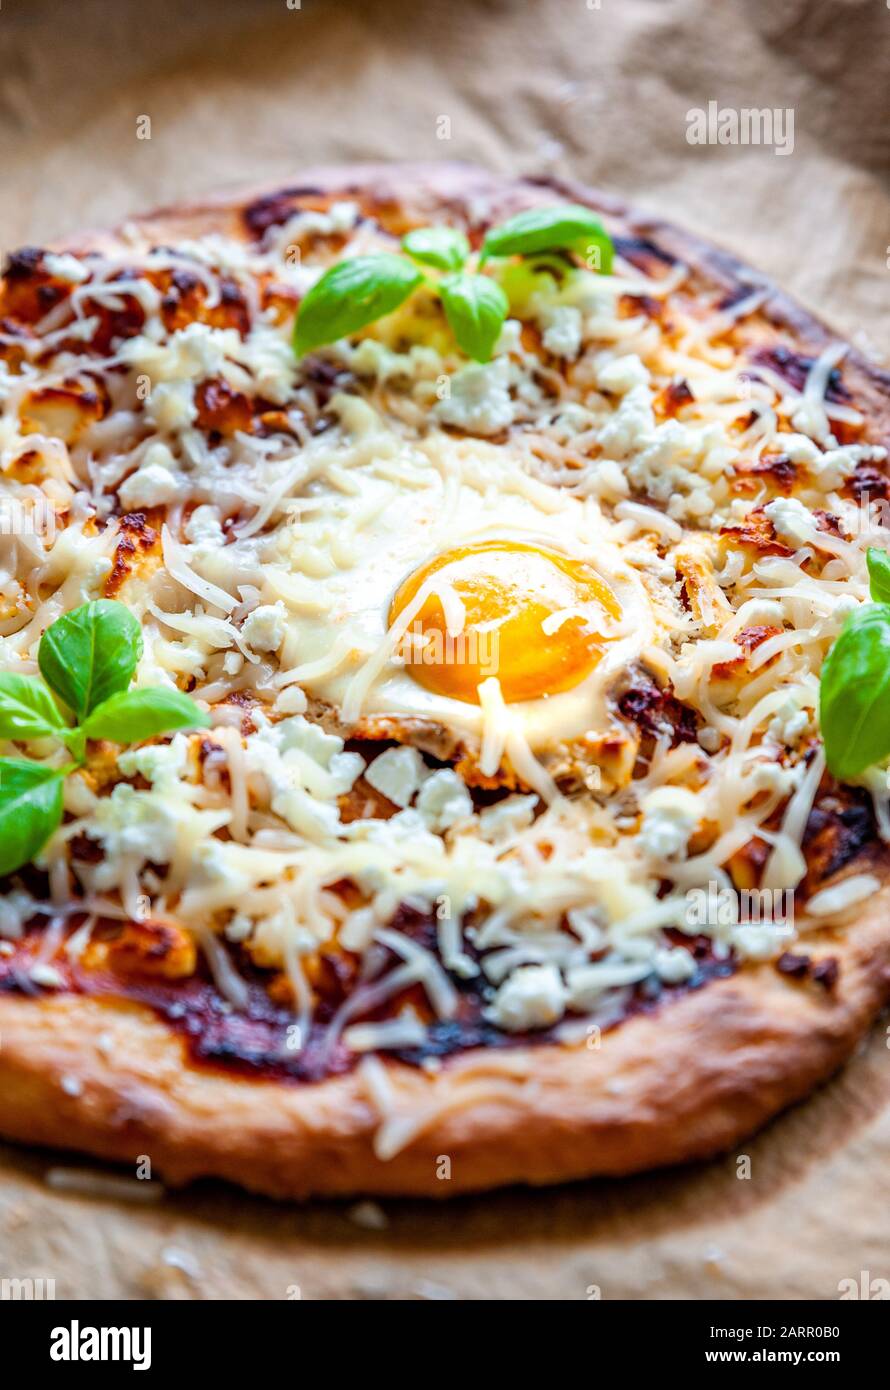 Above shot of a pizza with egg, cheese and herbs. Rustic scene and dramatic light. Stock Photo